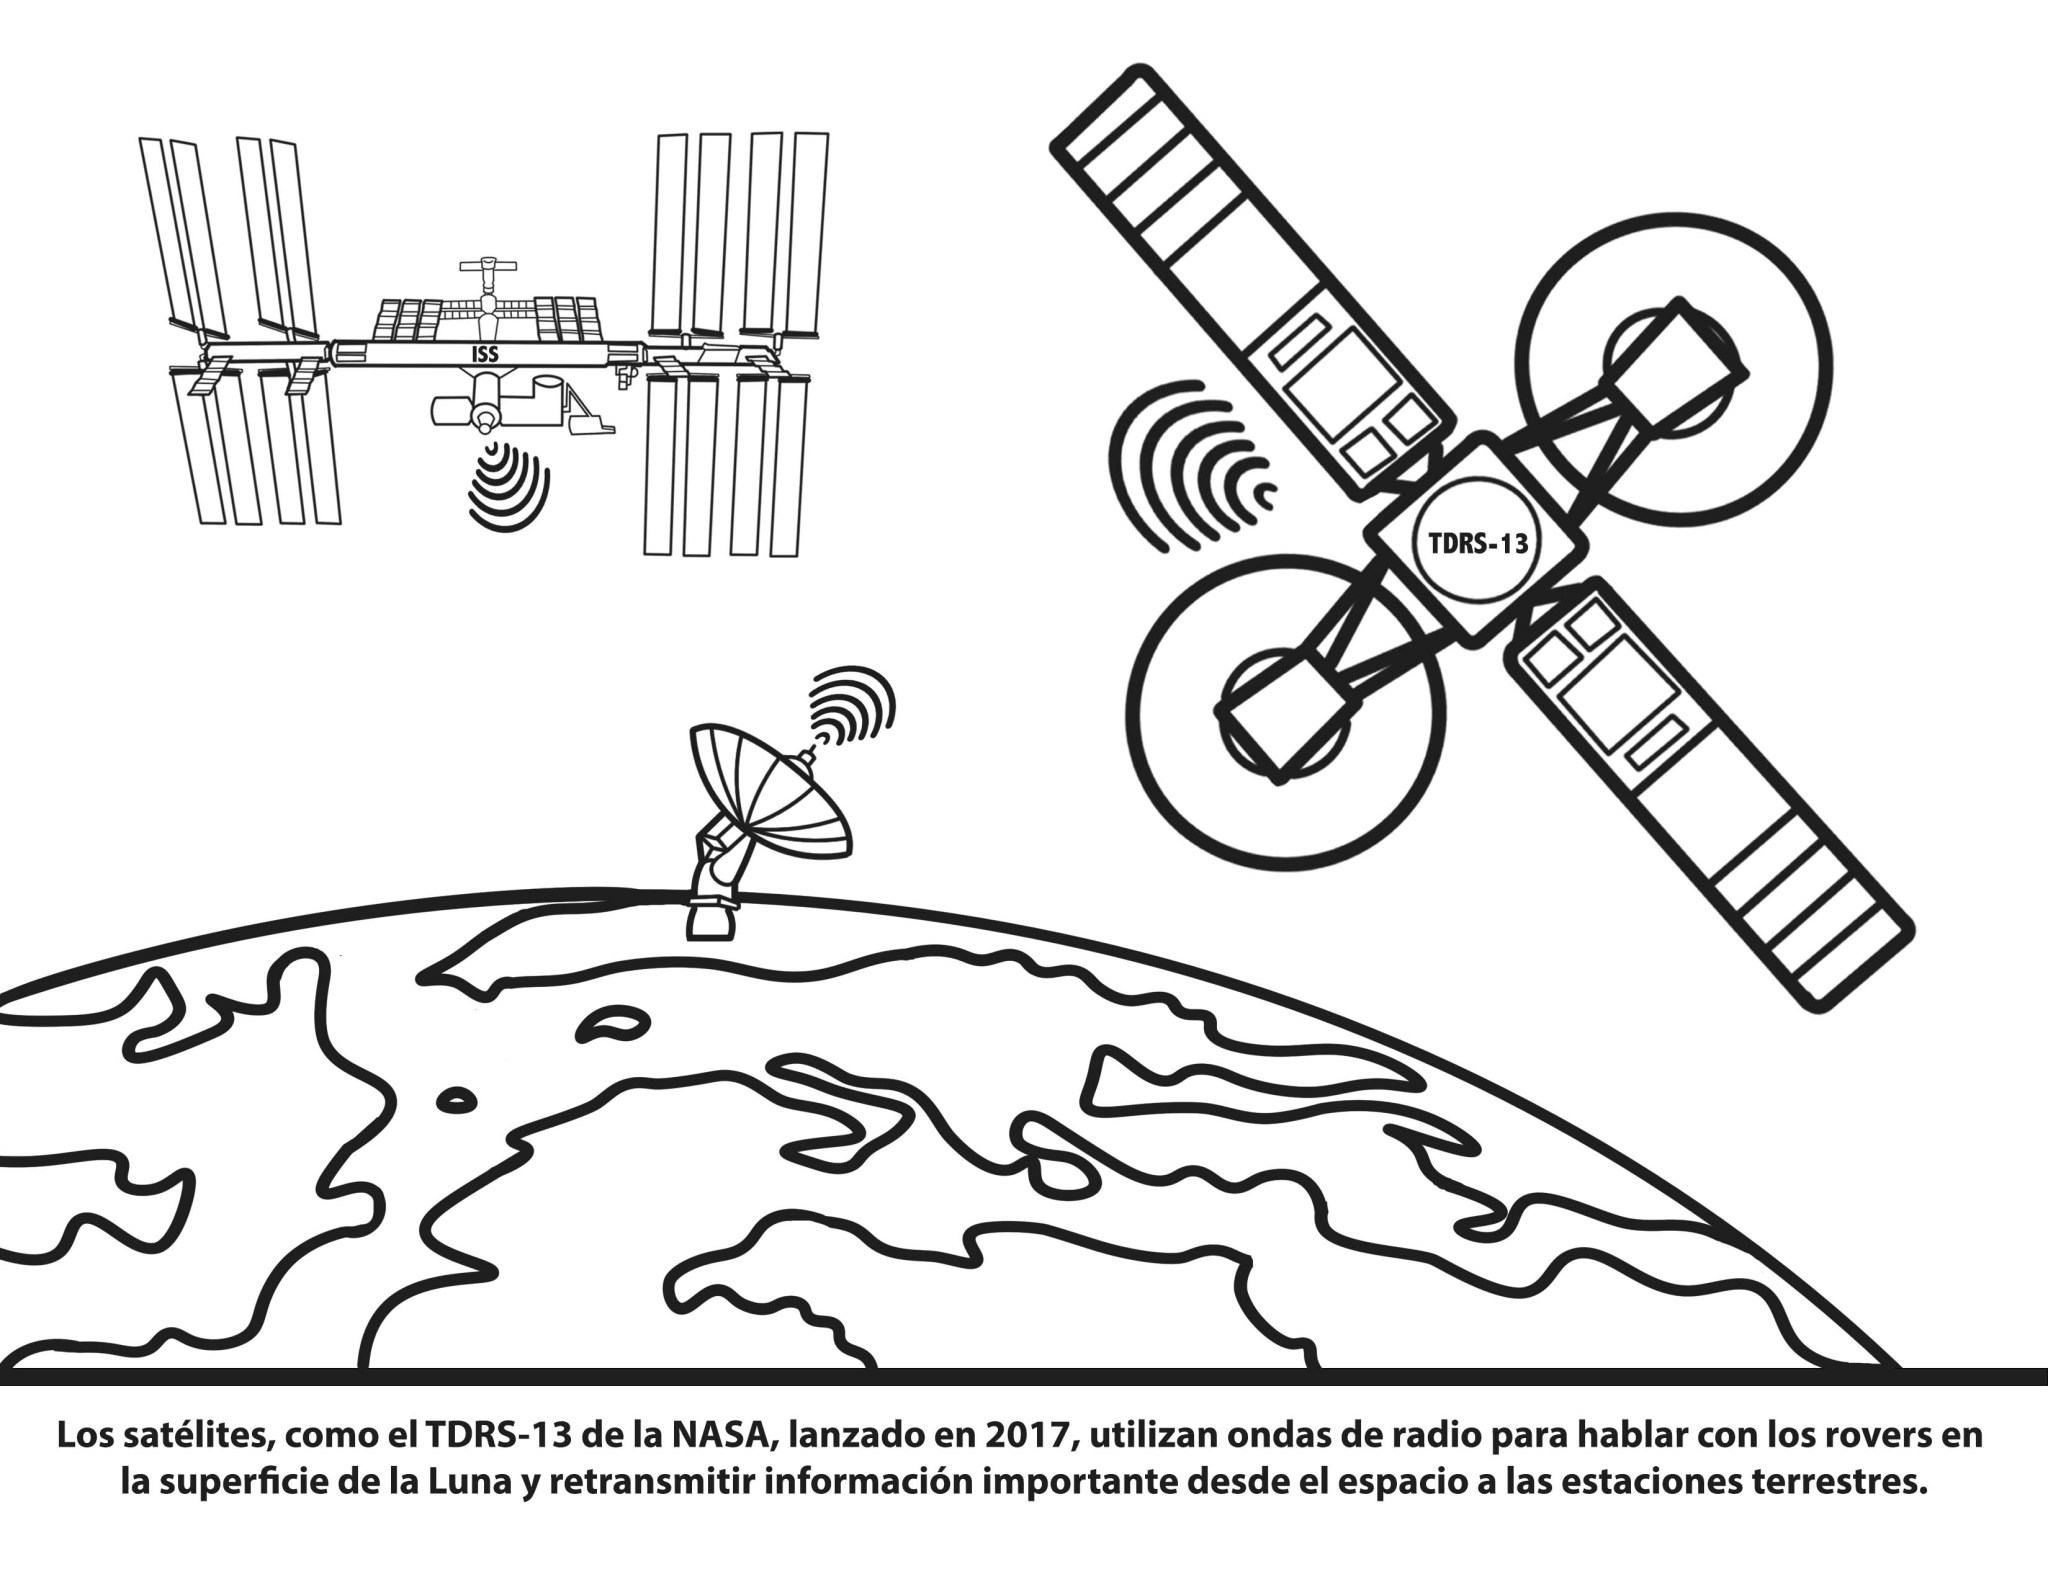 Black and white image of a coloring comic of the International Space Station, Tracking and Data Relay Satellite, and an antenna on Earth.